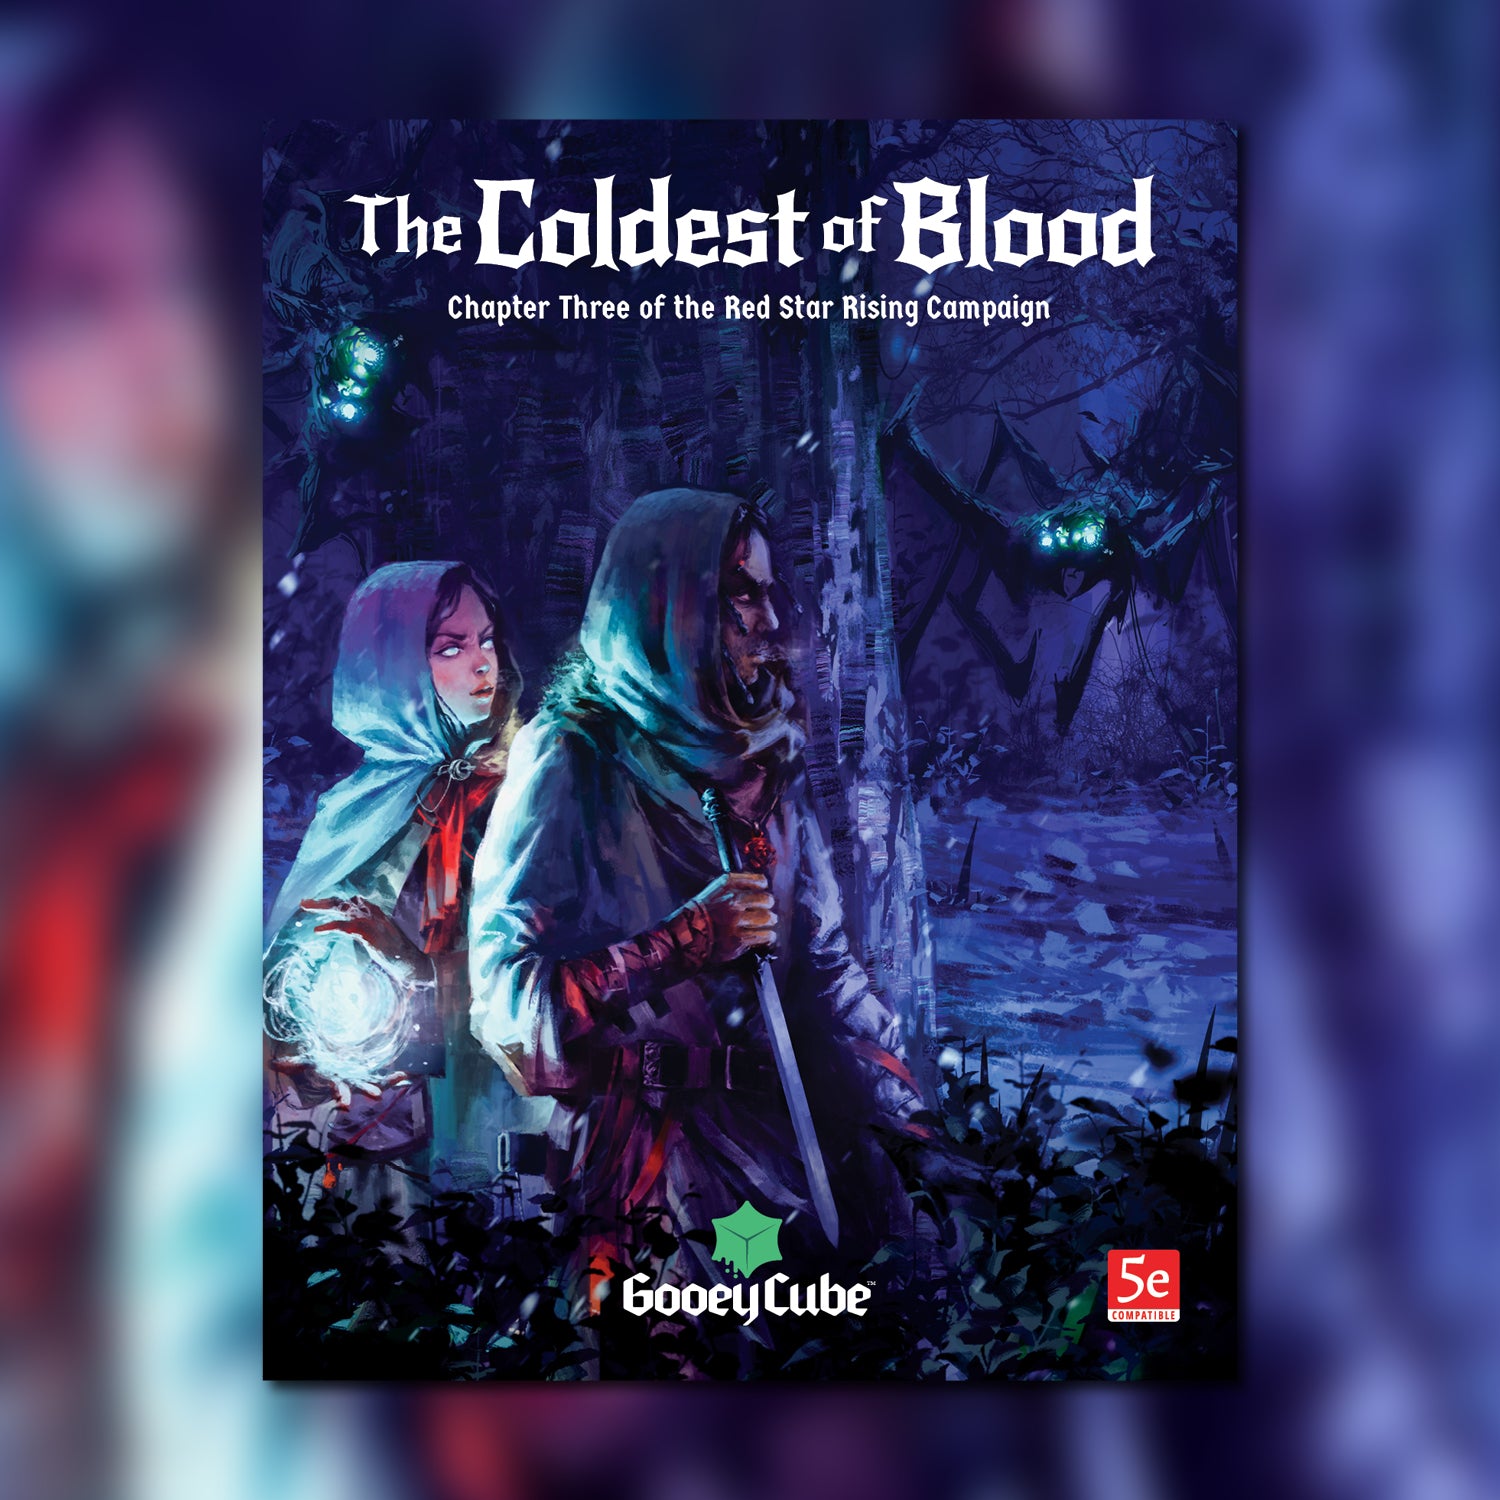 The Coldest of Blood – Chapter Three of the Red Star Rising Campaign